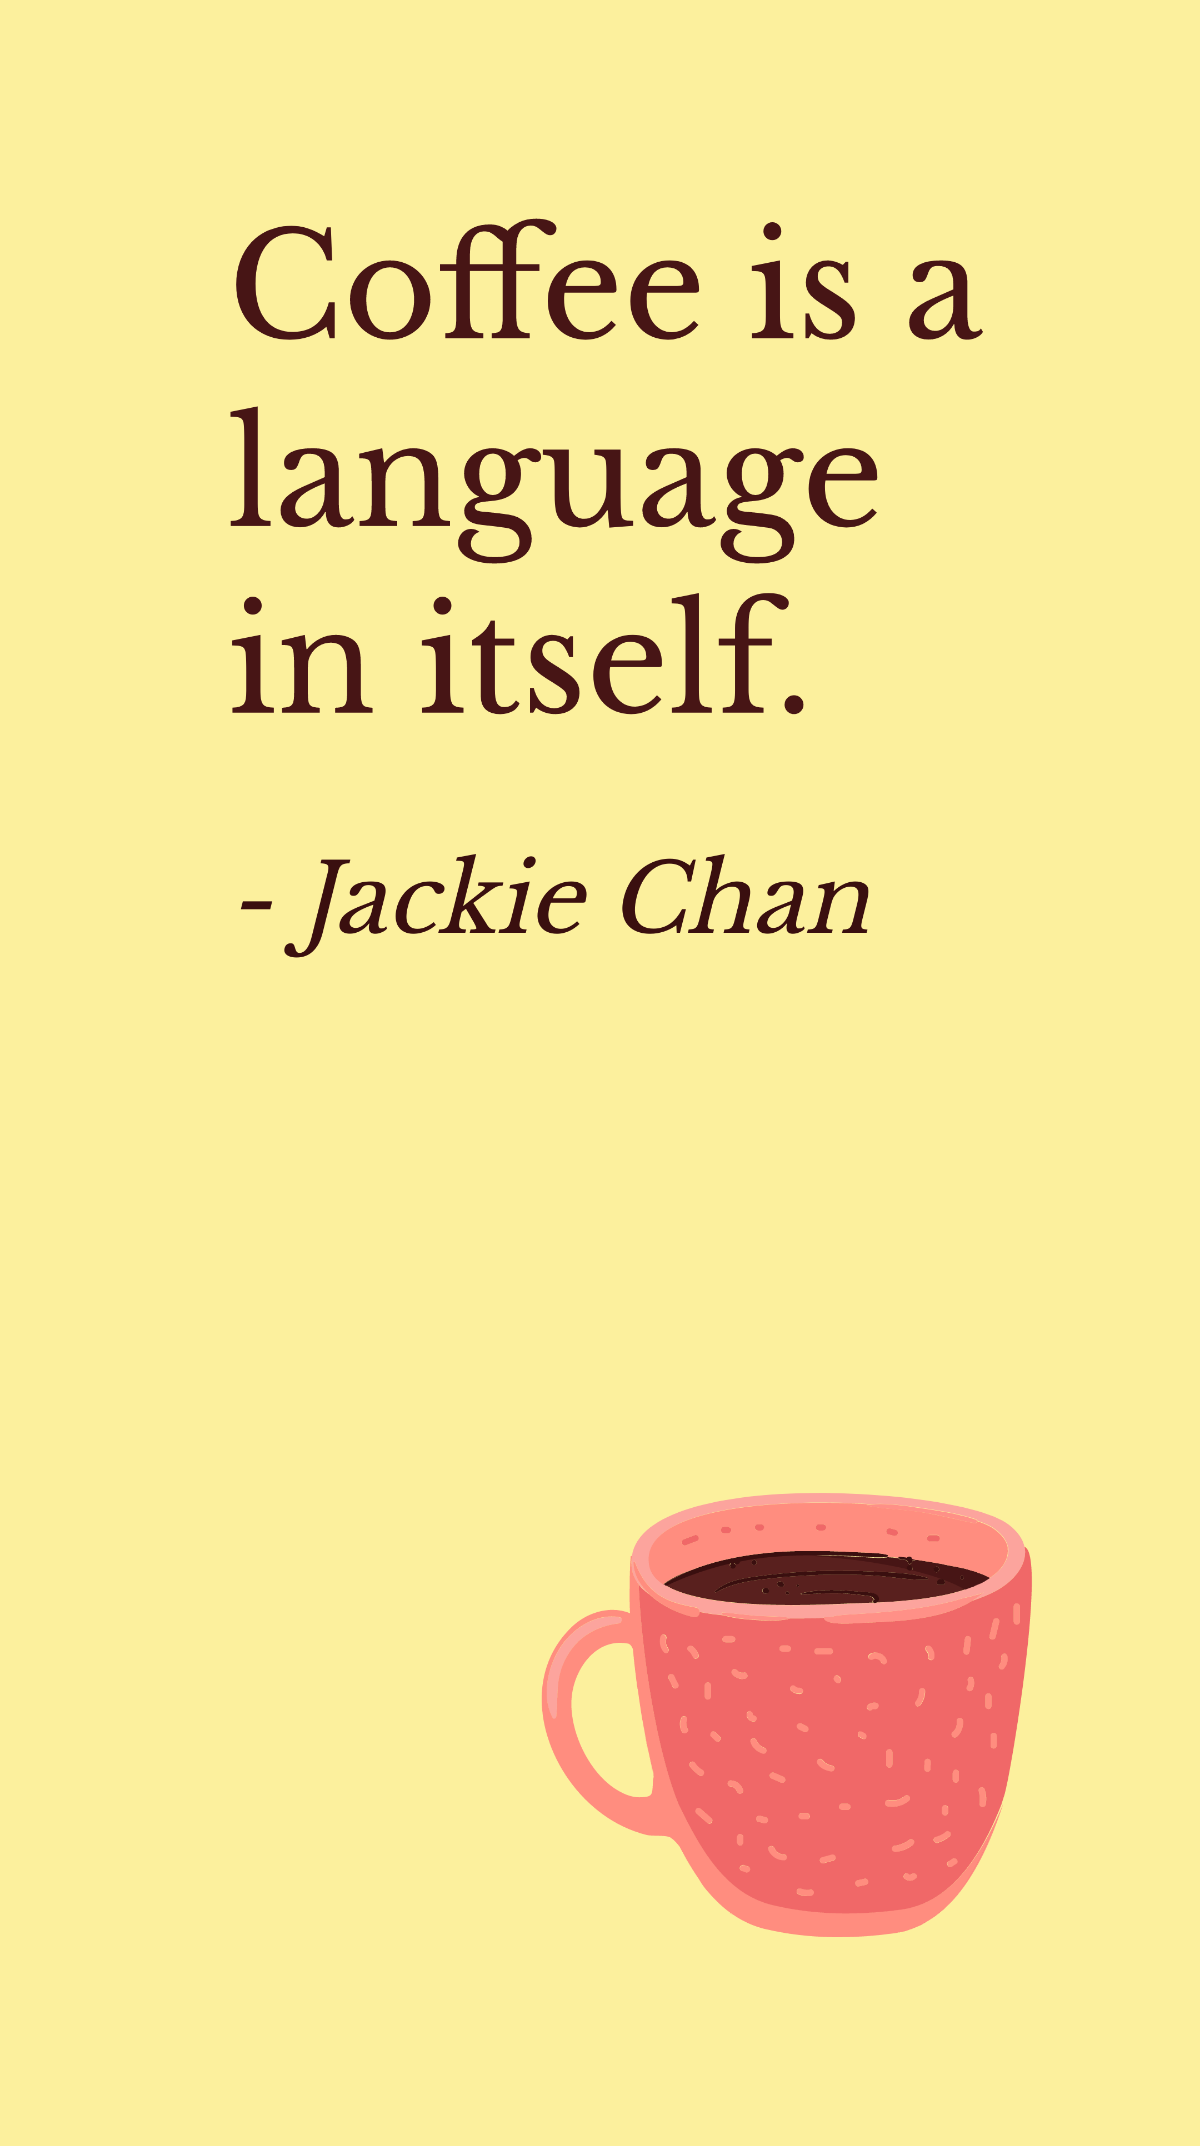 Jackie Chan - Coffee is a language in itself. Template